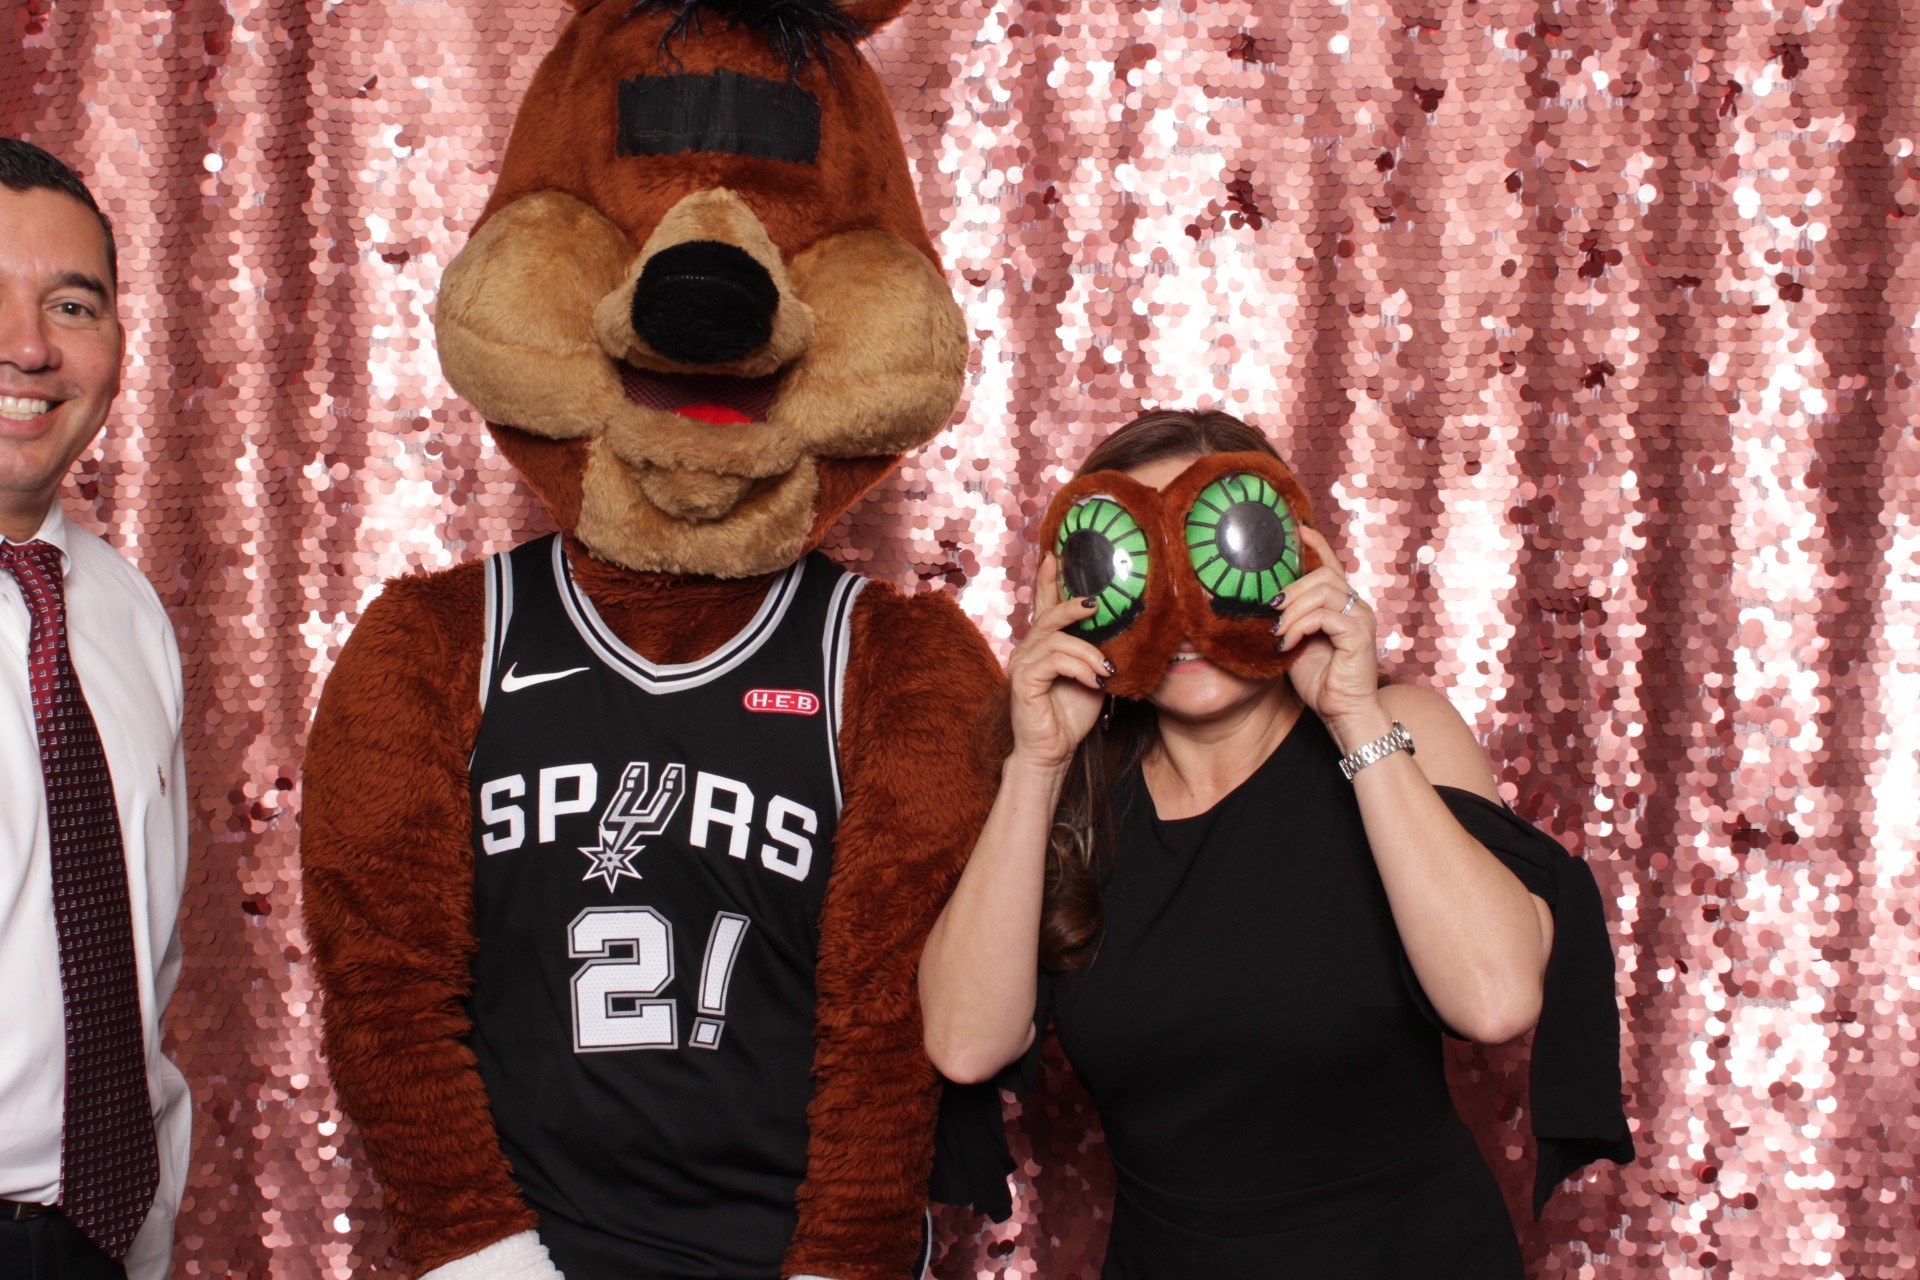 Coyote on the Spurs Fiesta Court, Looks like Coyote has already made  himself right at home on the #SpursFiesta court 🏠, By San Antonio Spurs